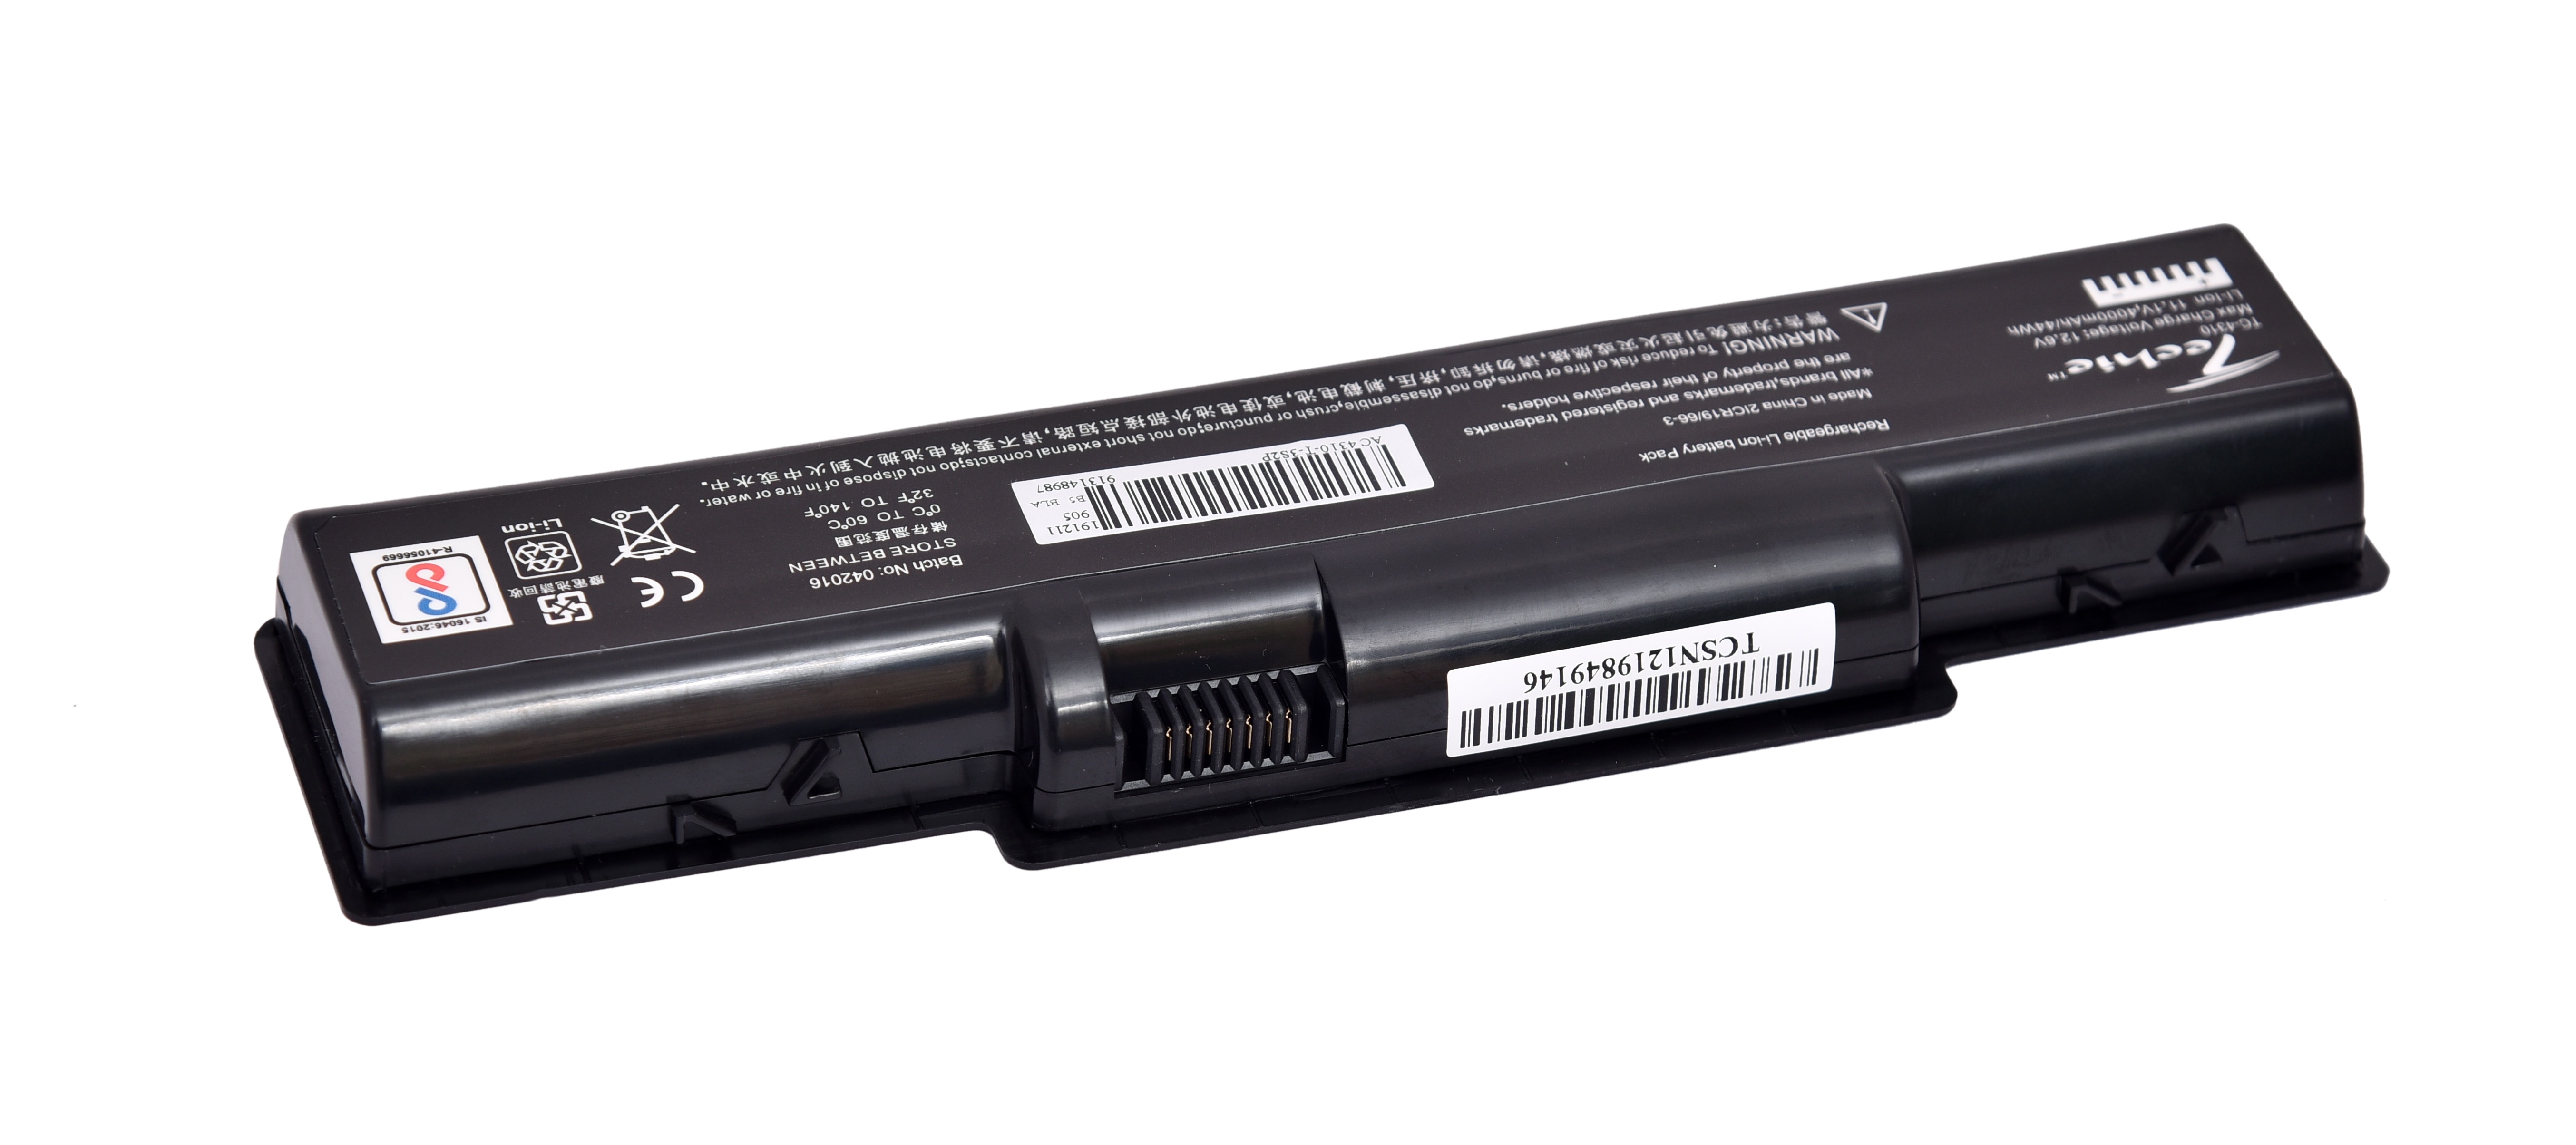 Techie Compatible Acer 4310 Battery for Acer Aspire 4310, 4710, 4720, 4732, 4736, 4740, 4740G Series laptops.